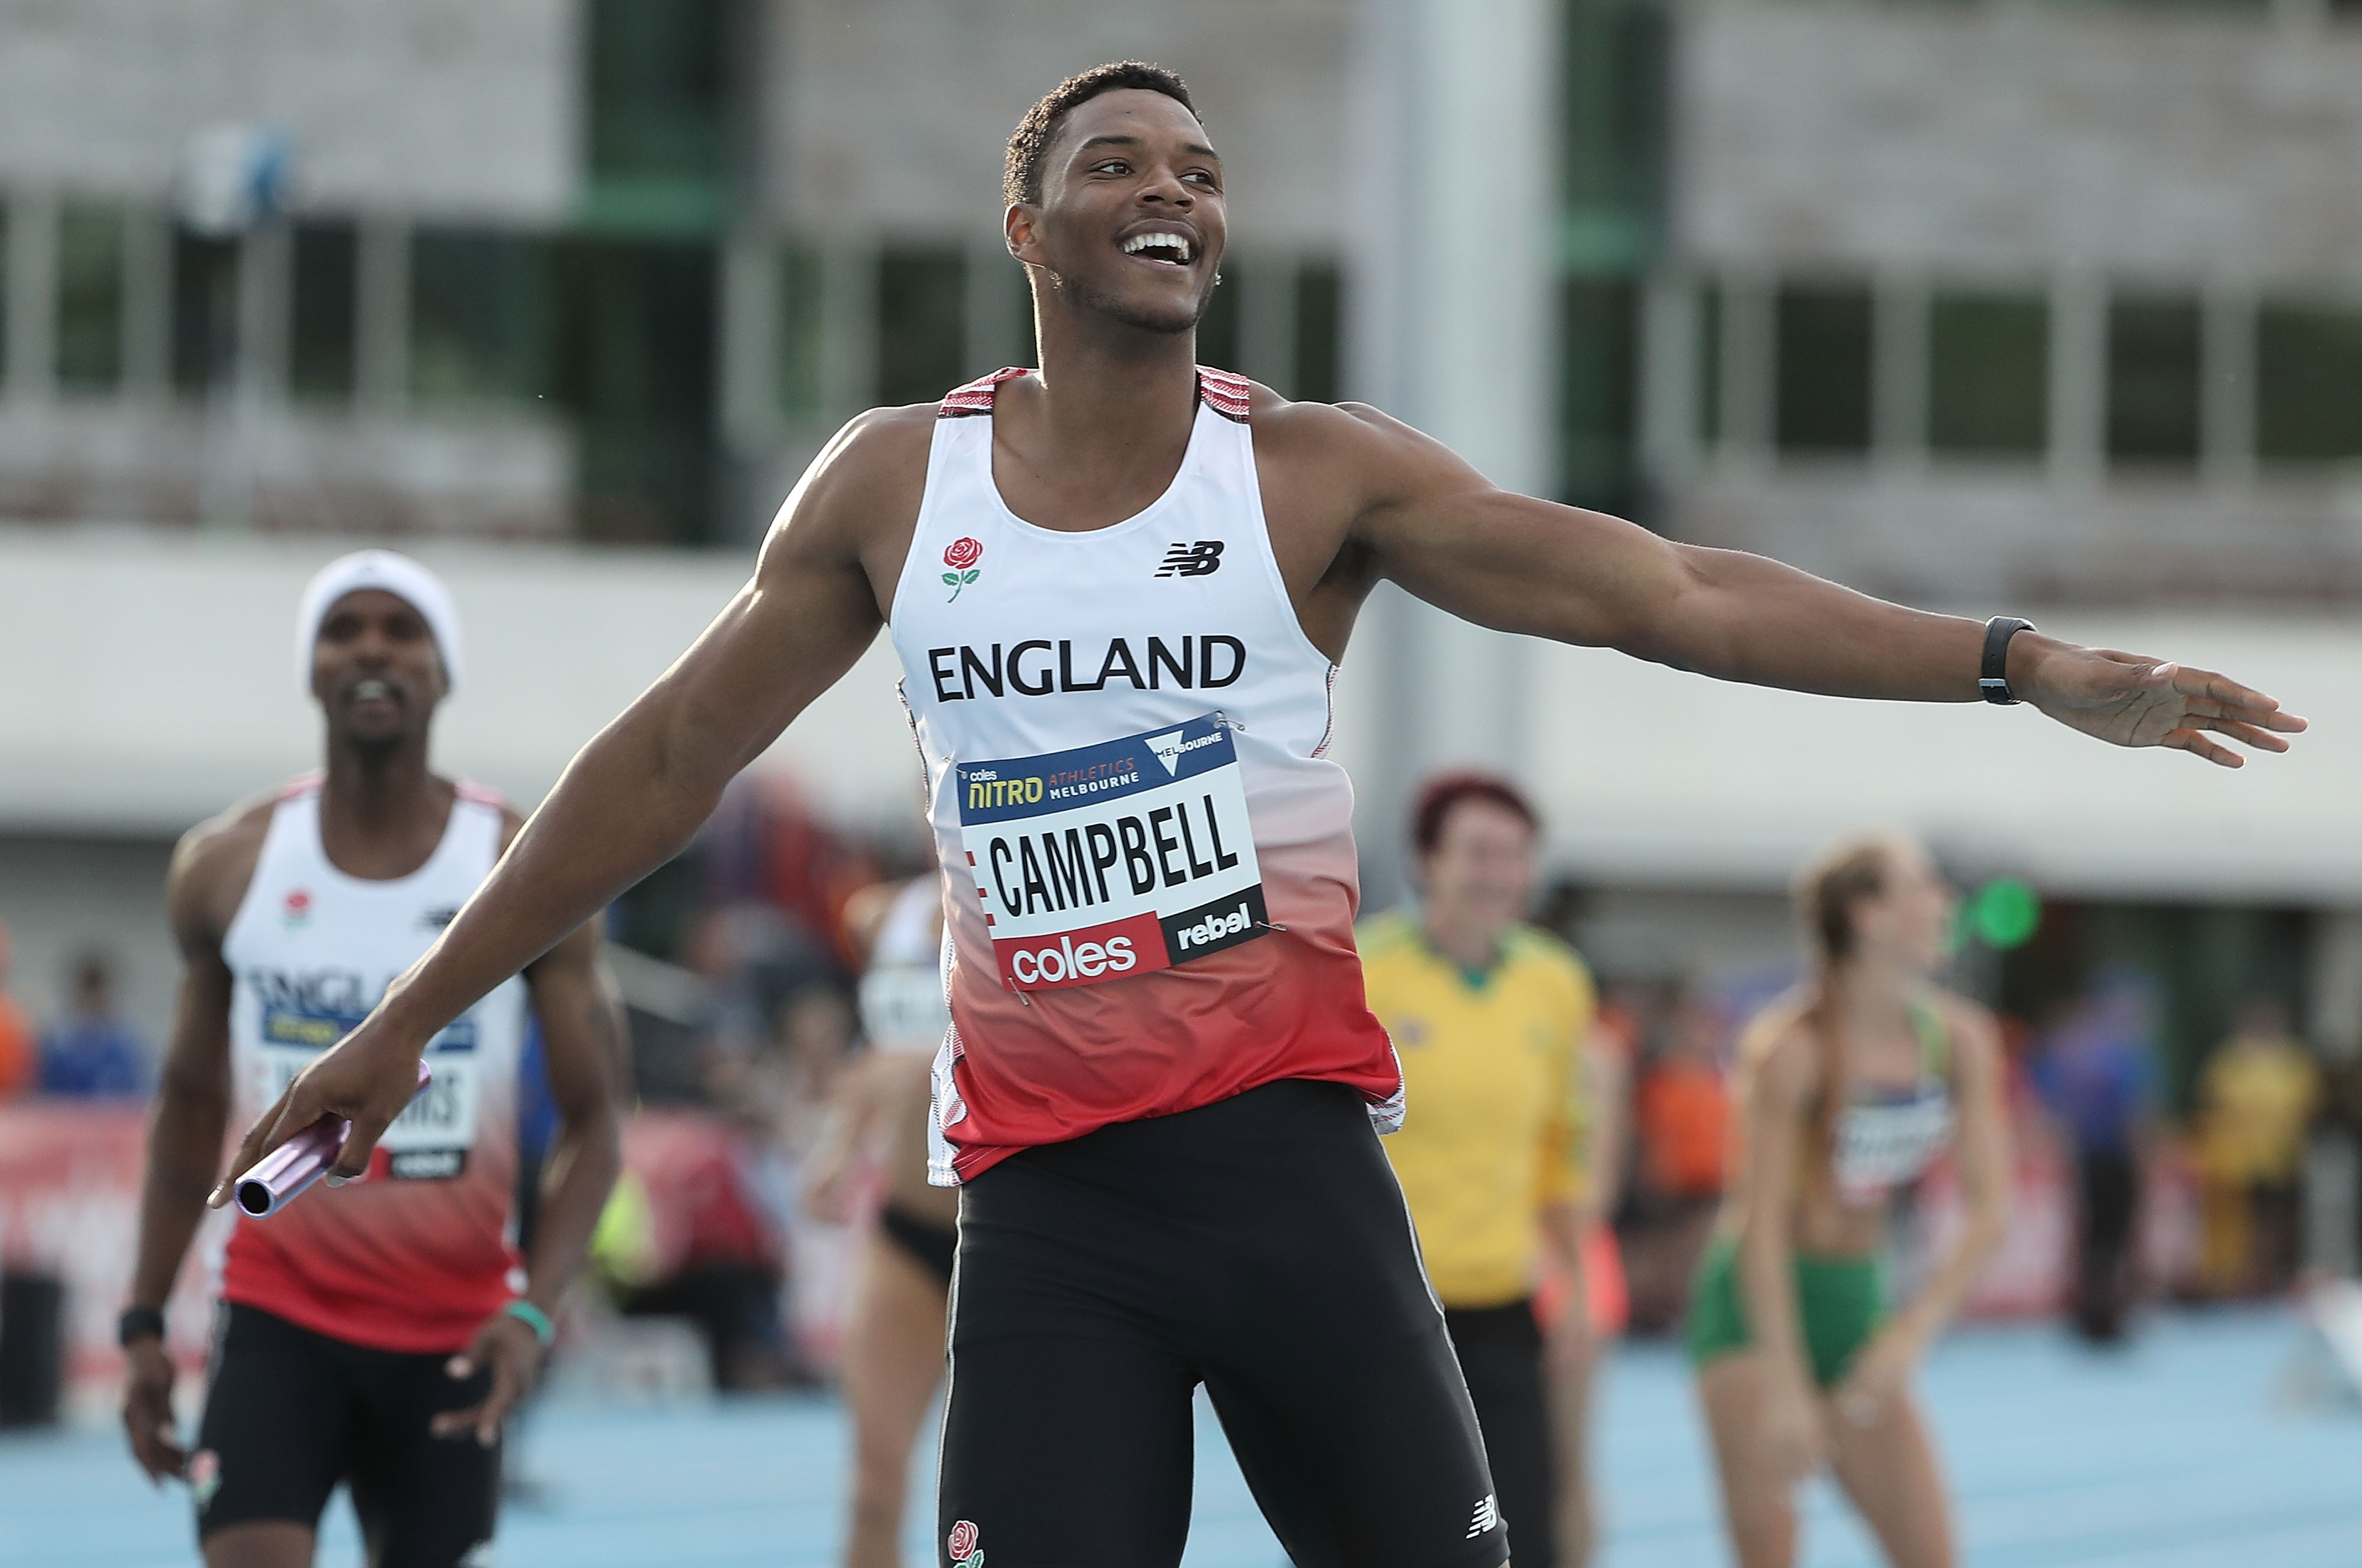 Theo Campbell of England celebrates as he crosses the finish line to win the Mixed 4x400 Metre Relay during the 2017 Nitro Athletics Series